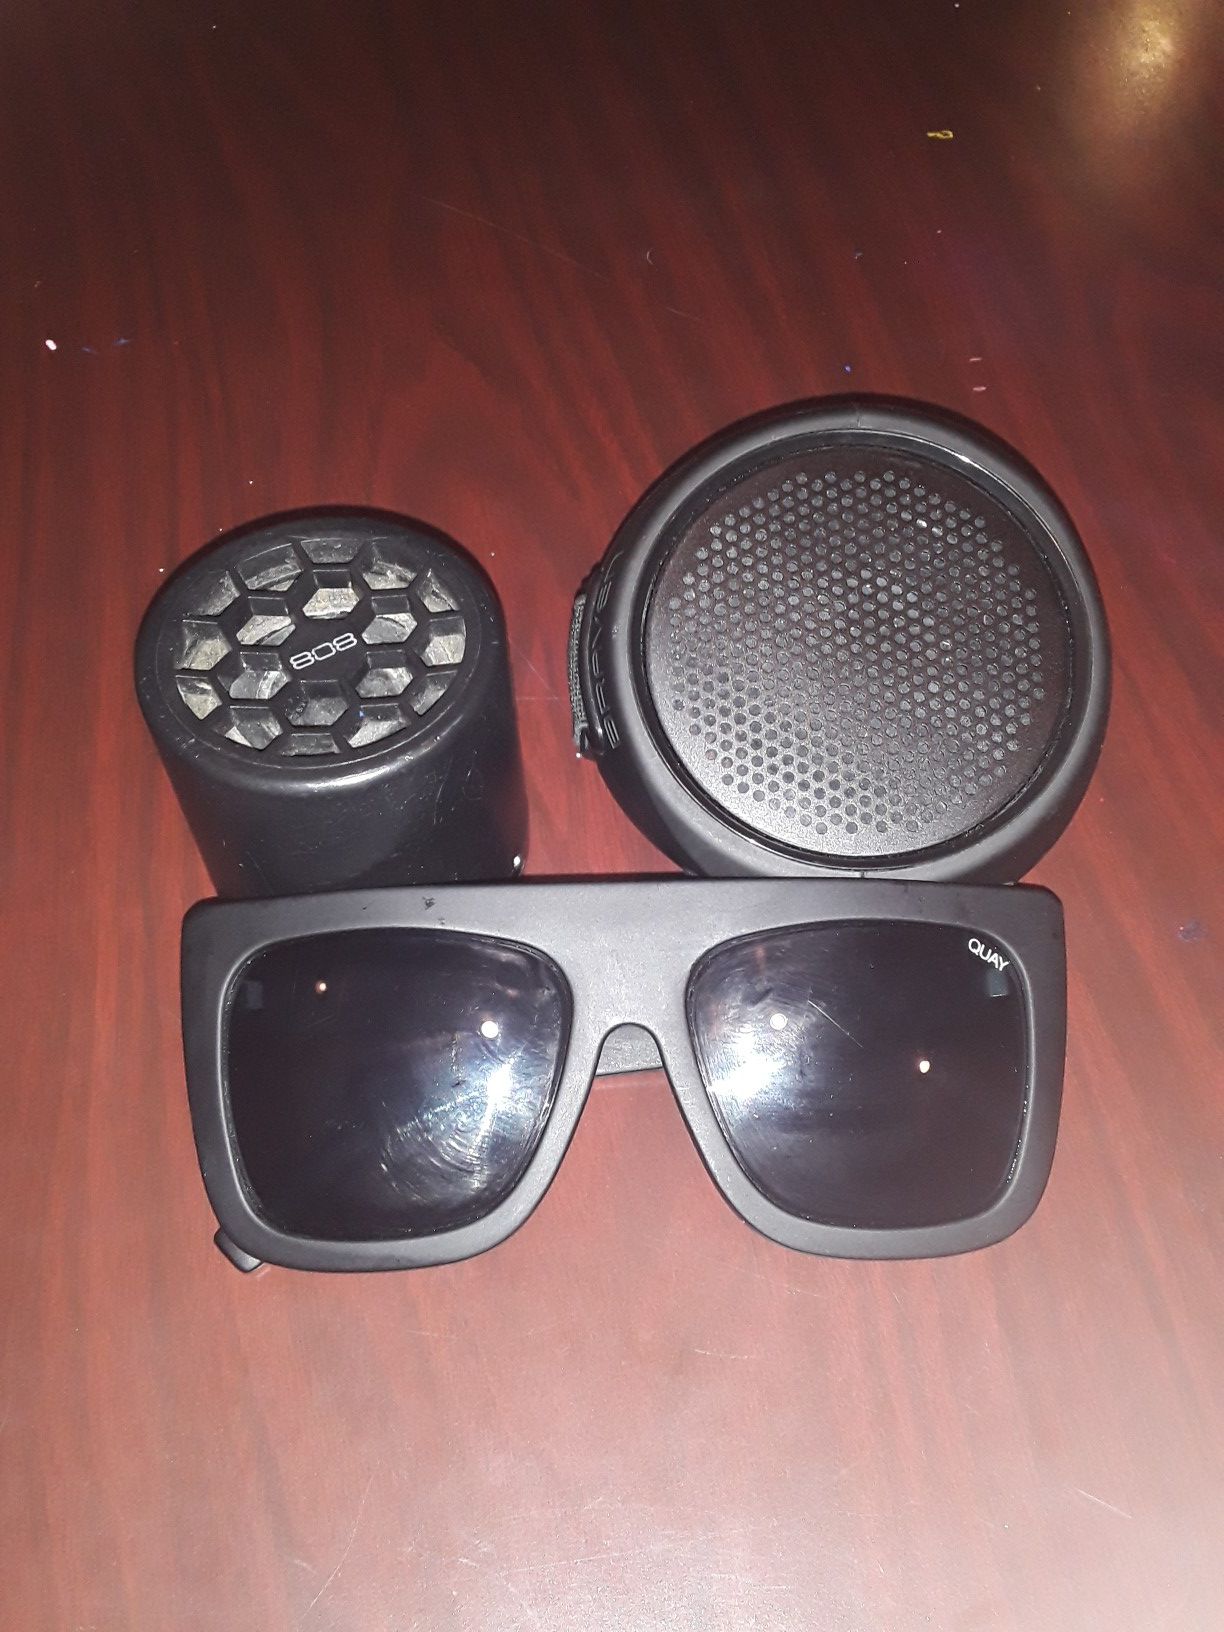 Speakers and sun glasses